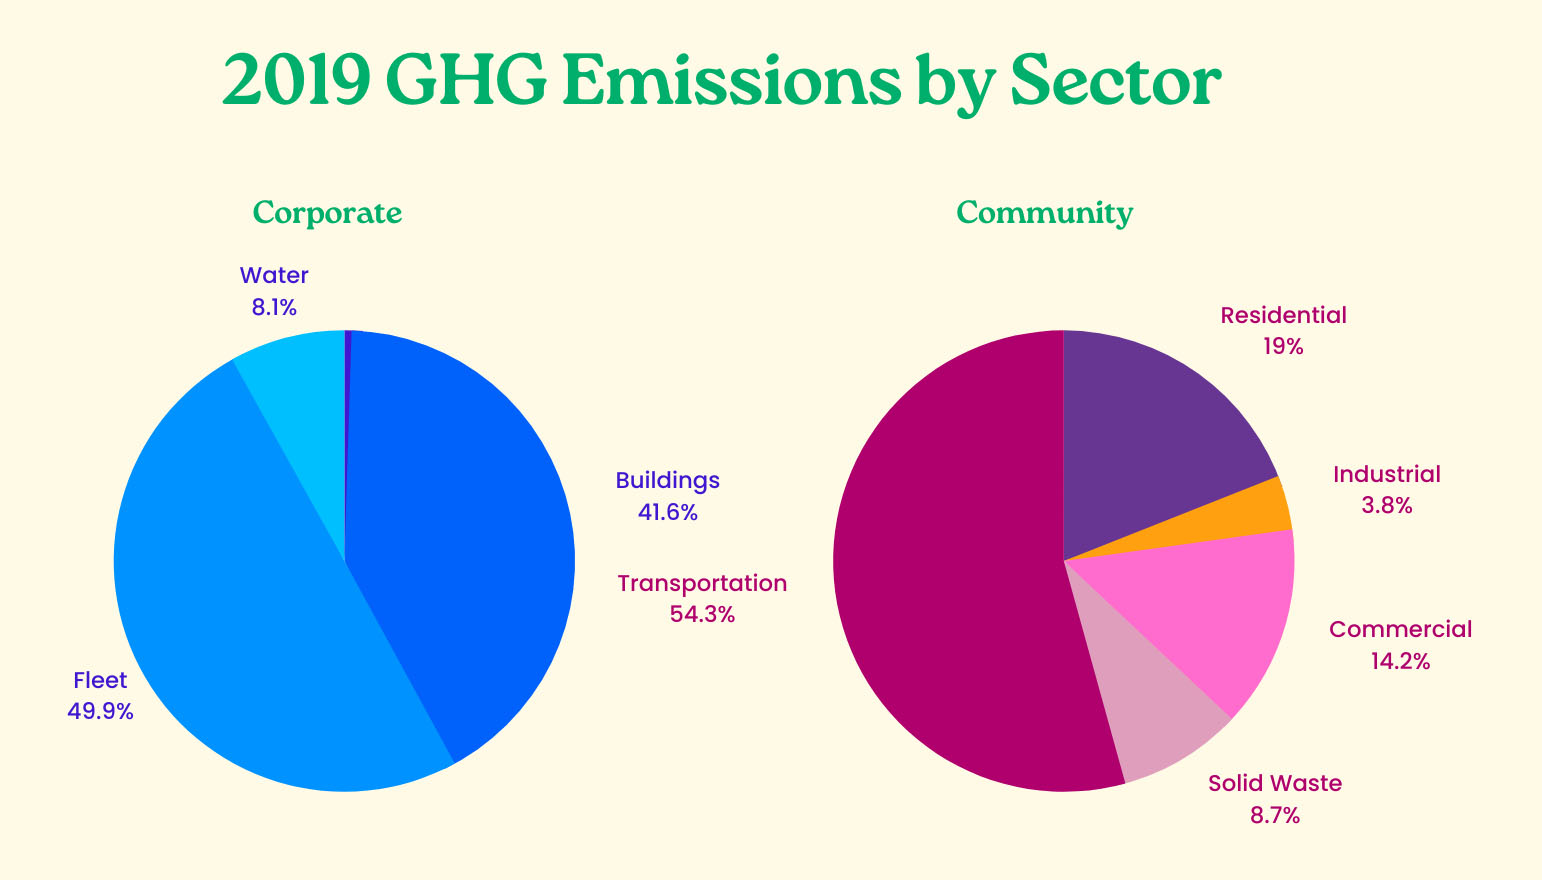 This graph shows the corporate and community greenhouse gas emissions by sector as of 2019. For corporate GHG, the fleet is 49.9%, buildings are 41.6% and water is 8.1%. For community GHG, transportation is 54.3%, residential is 19%, industrial is 3.8%, commercial is 14.2%, and solid waste is 8.7%.